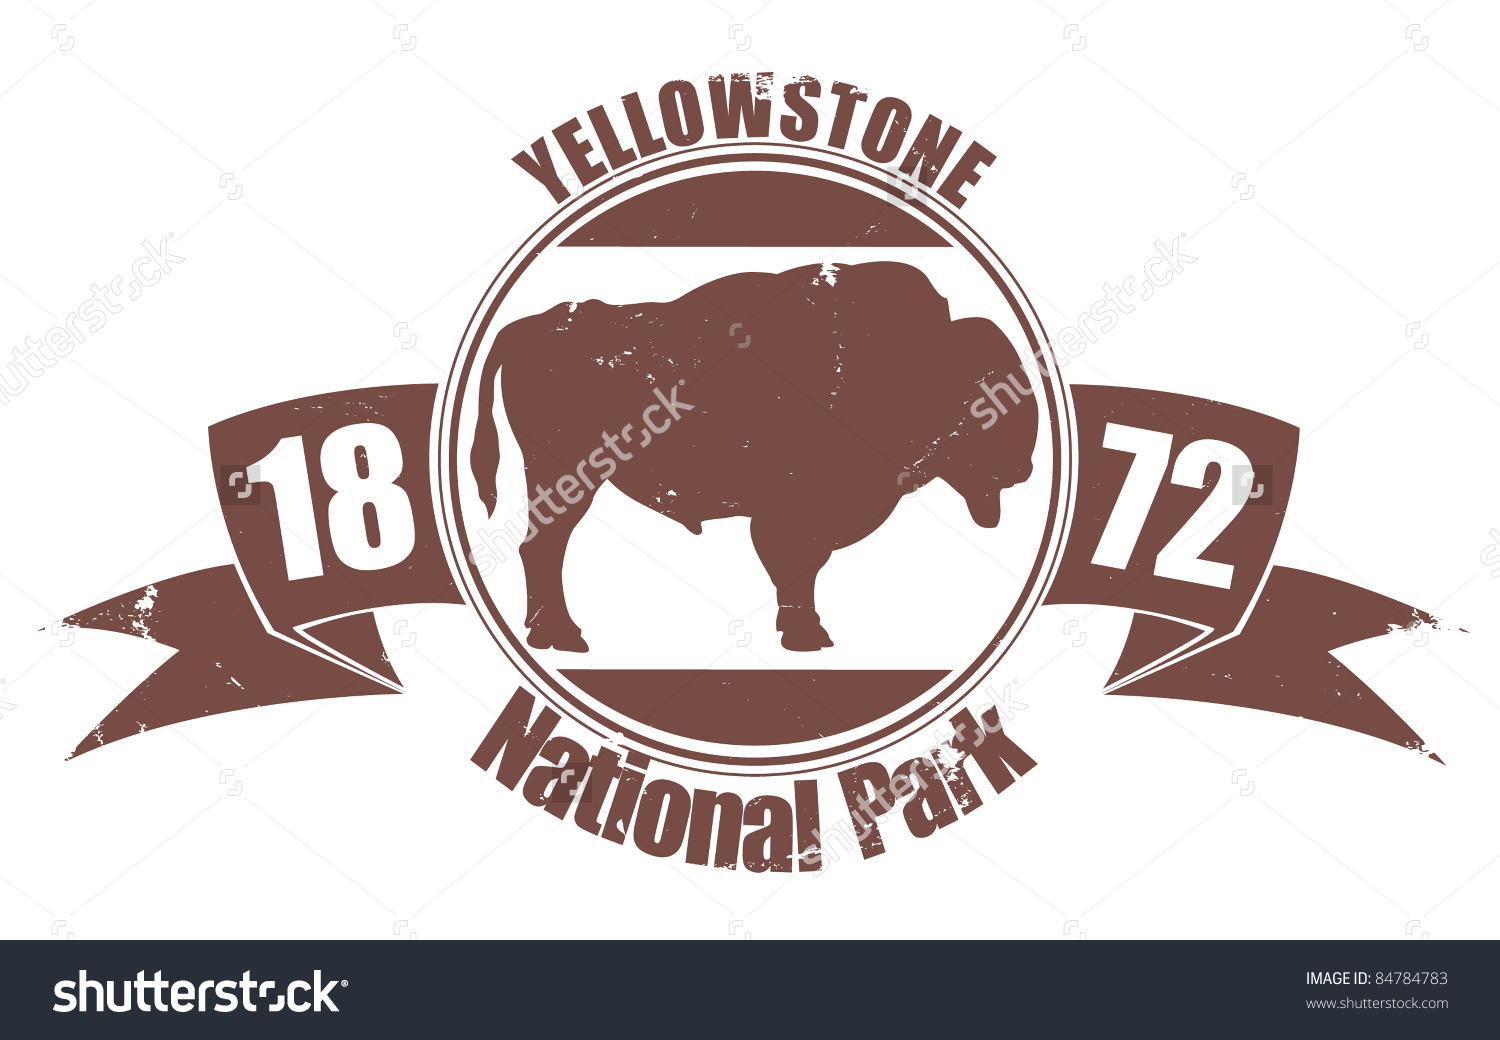 Yellowstone National Park clipart #4, Download drawings